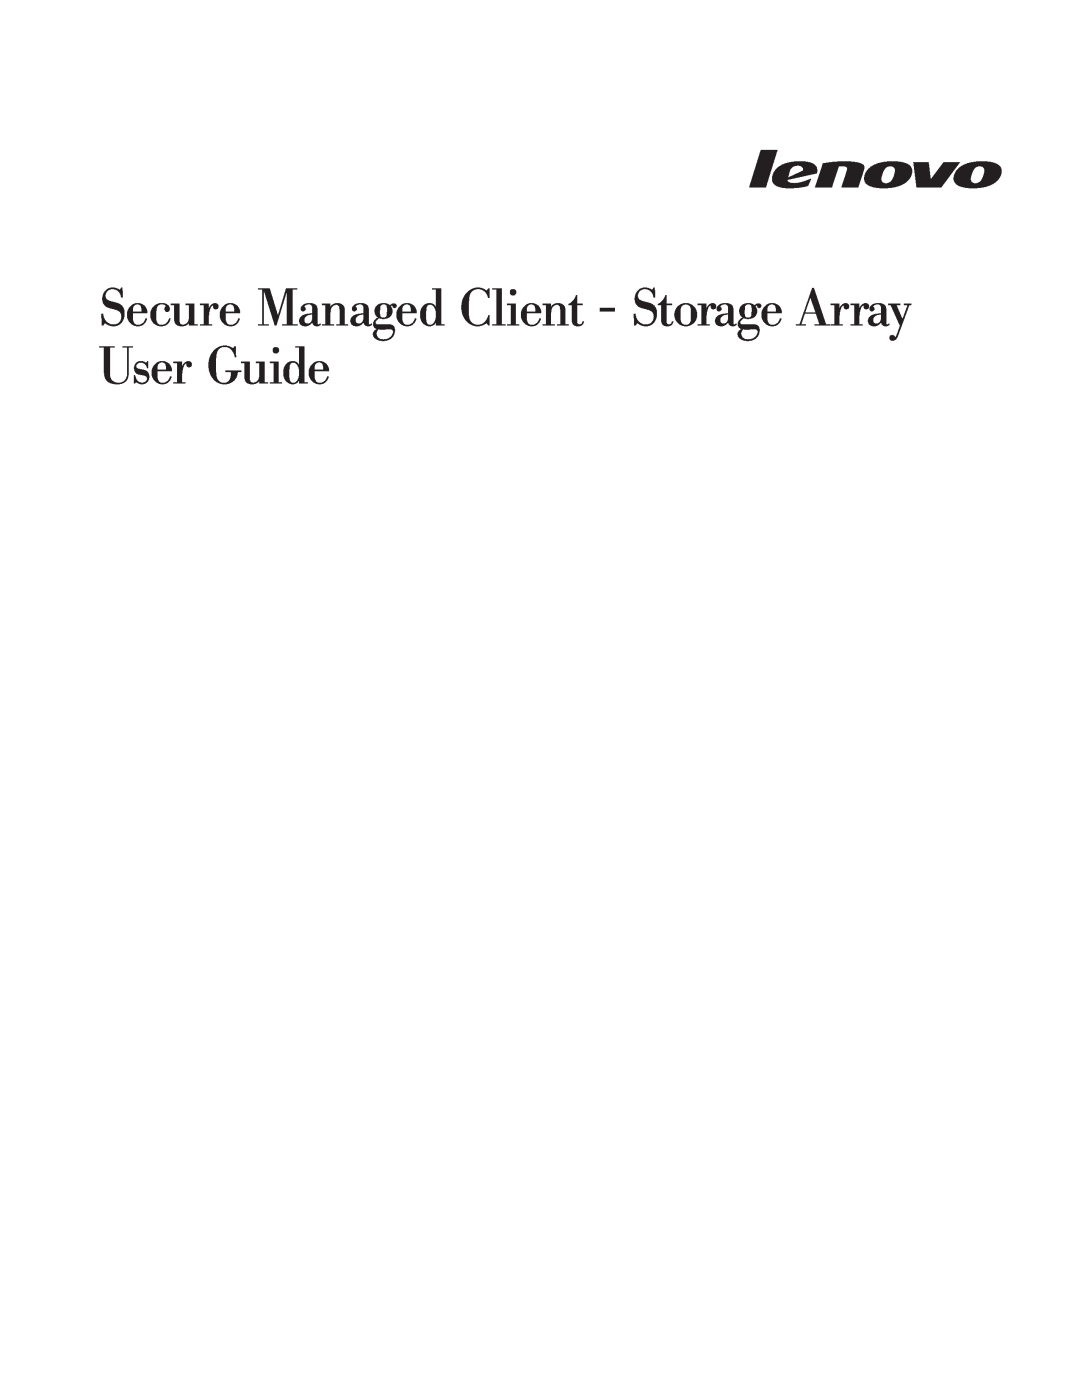 Lenovo 8332 manual Secure Managed Client - Storage Array User Guide 